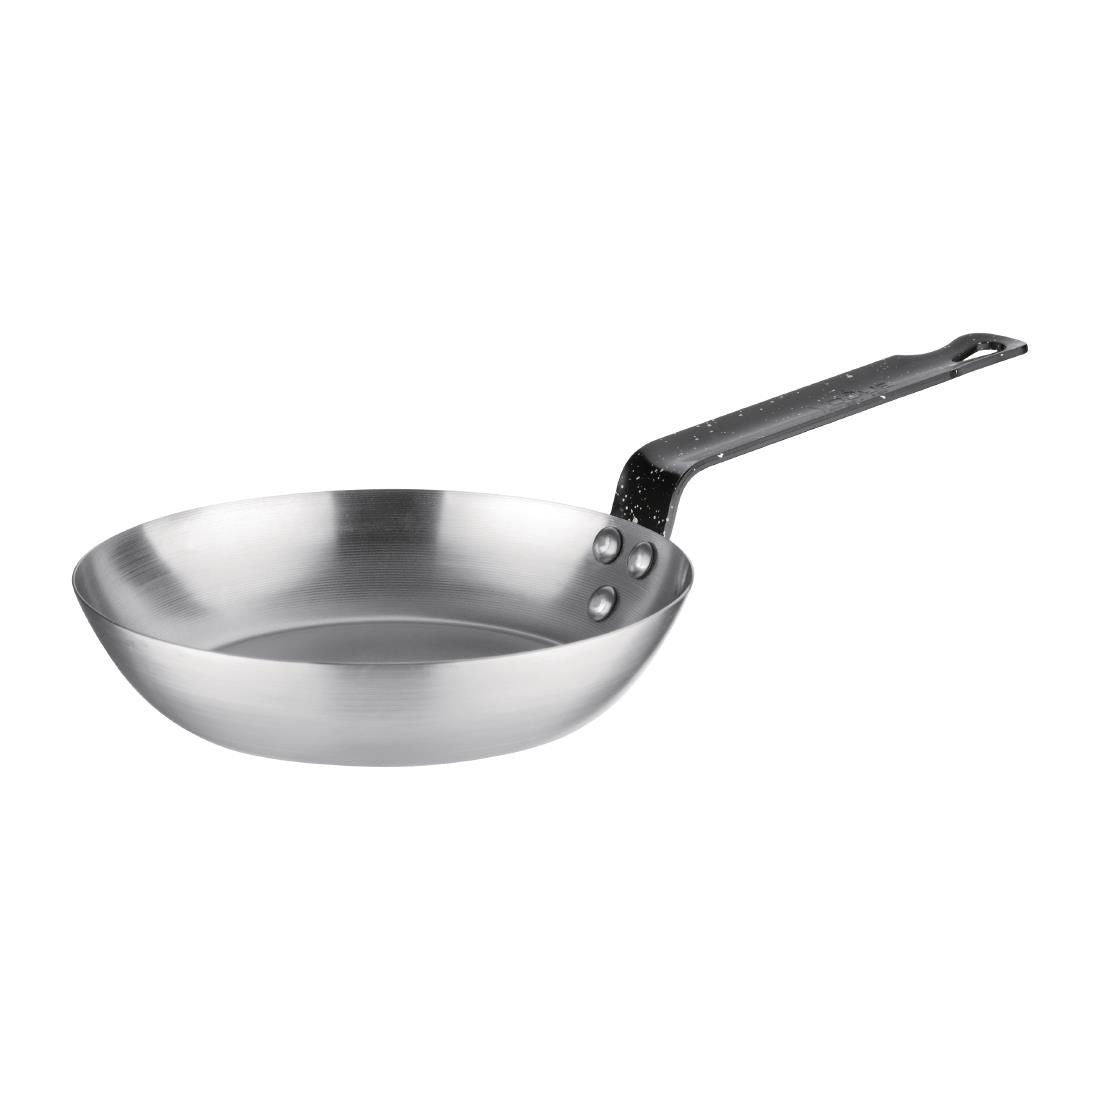 GD062 Vogue Carbon Steel Frying Pan 180mm JD Catering Equipment Solutions Ltd